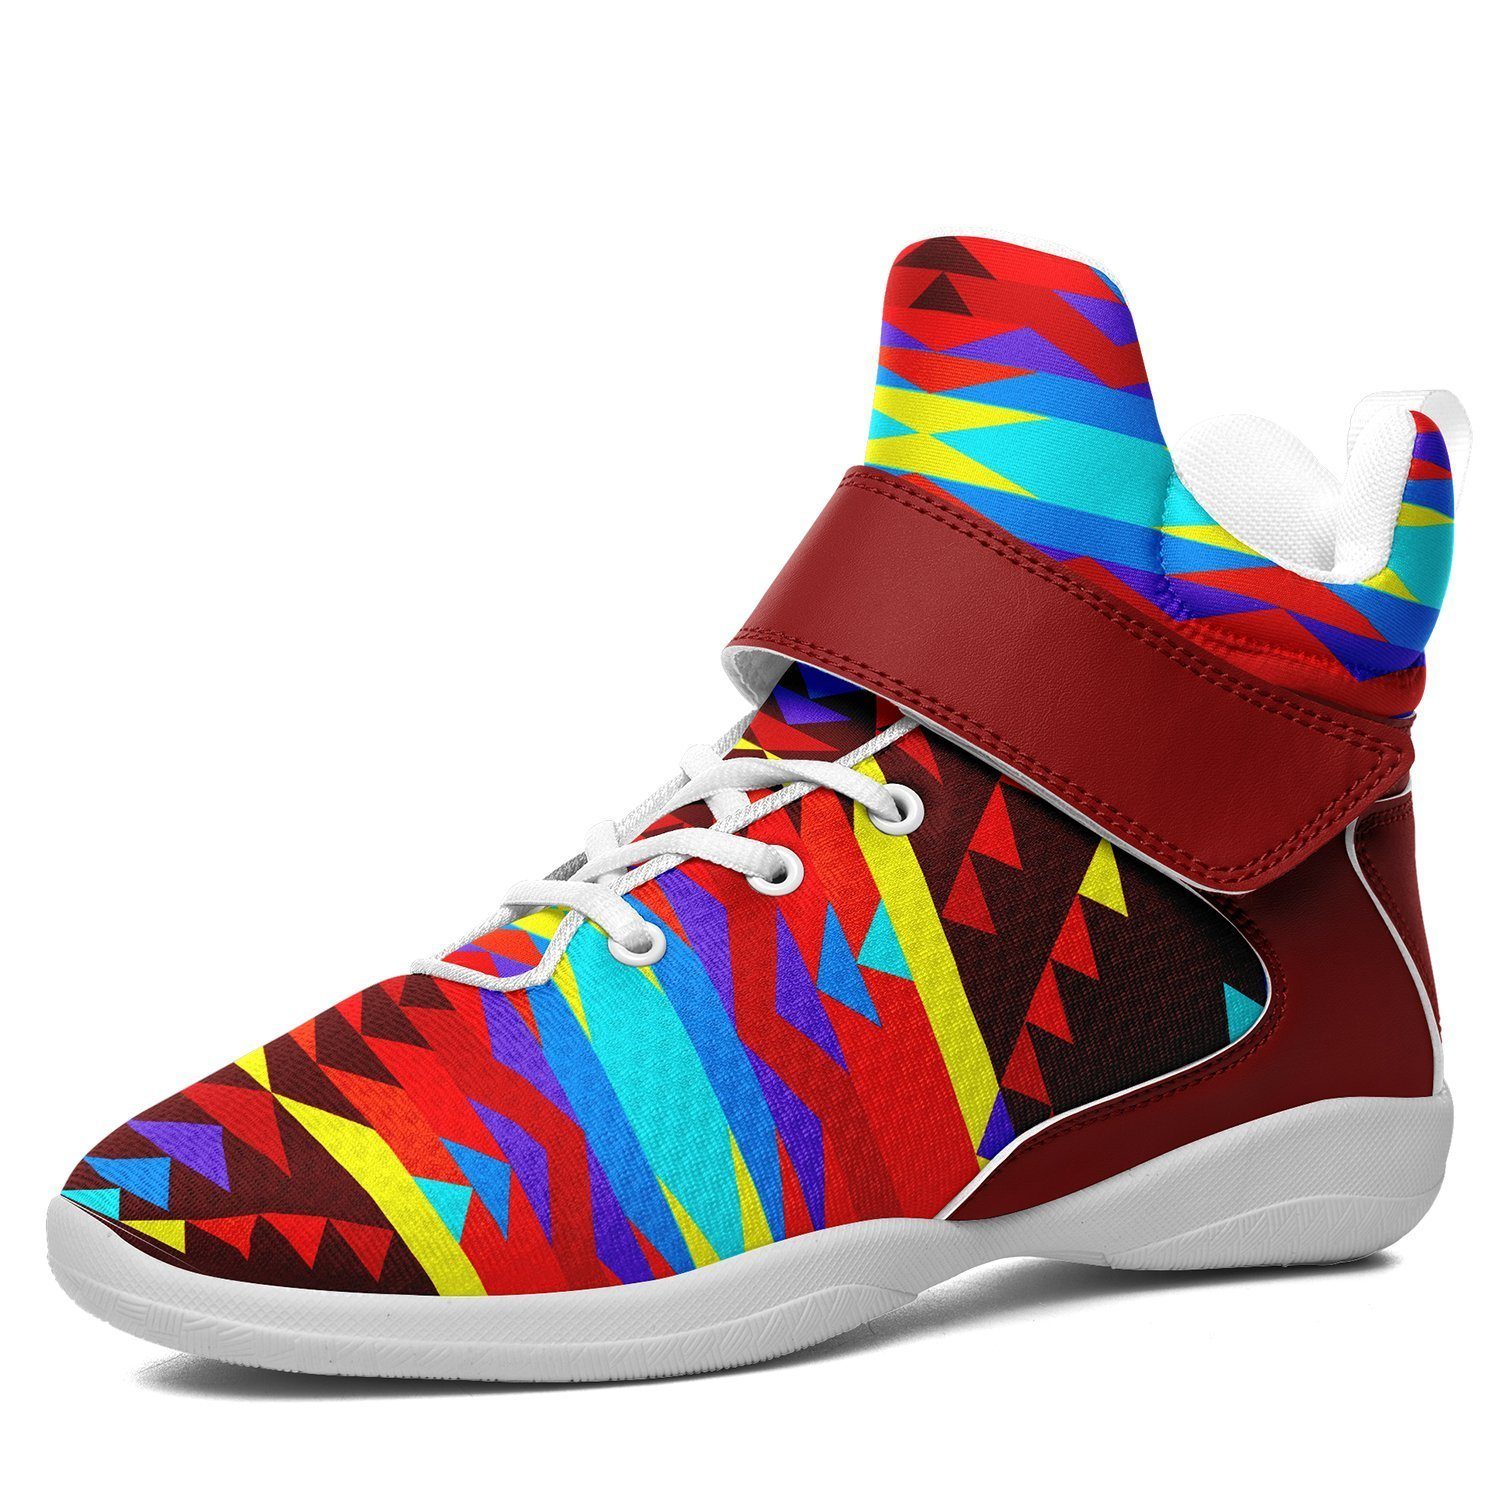 Visions of Lasting Peace Ipottaa Basketball / Sport High Top Shoes - White Sole 49 Dzine US Men 7 / EUR 40 White Sole with Dark Red Strap 